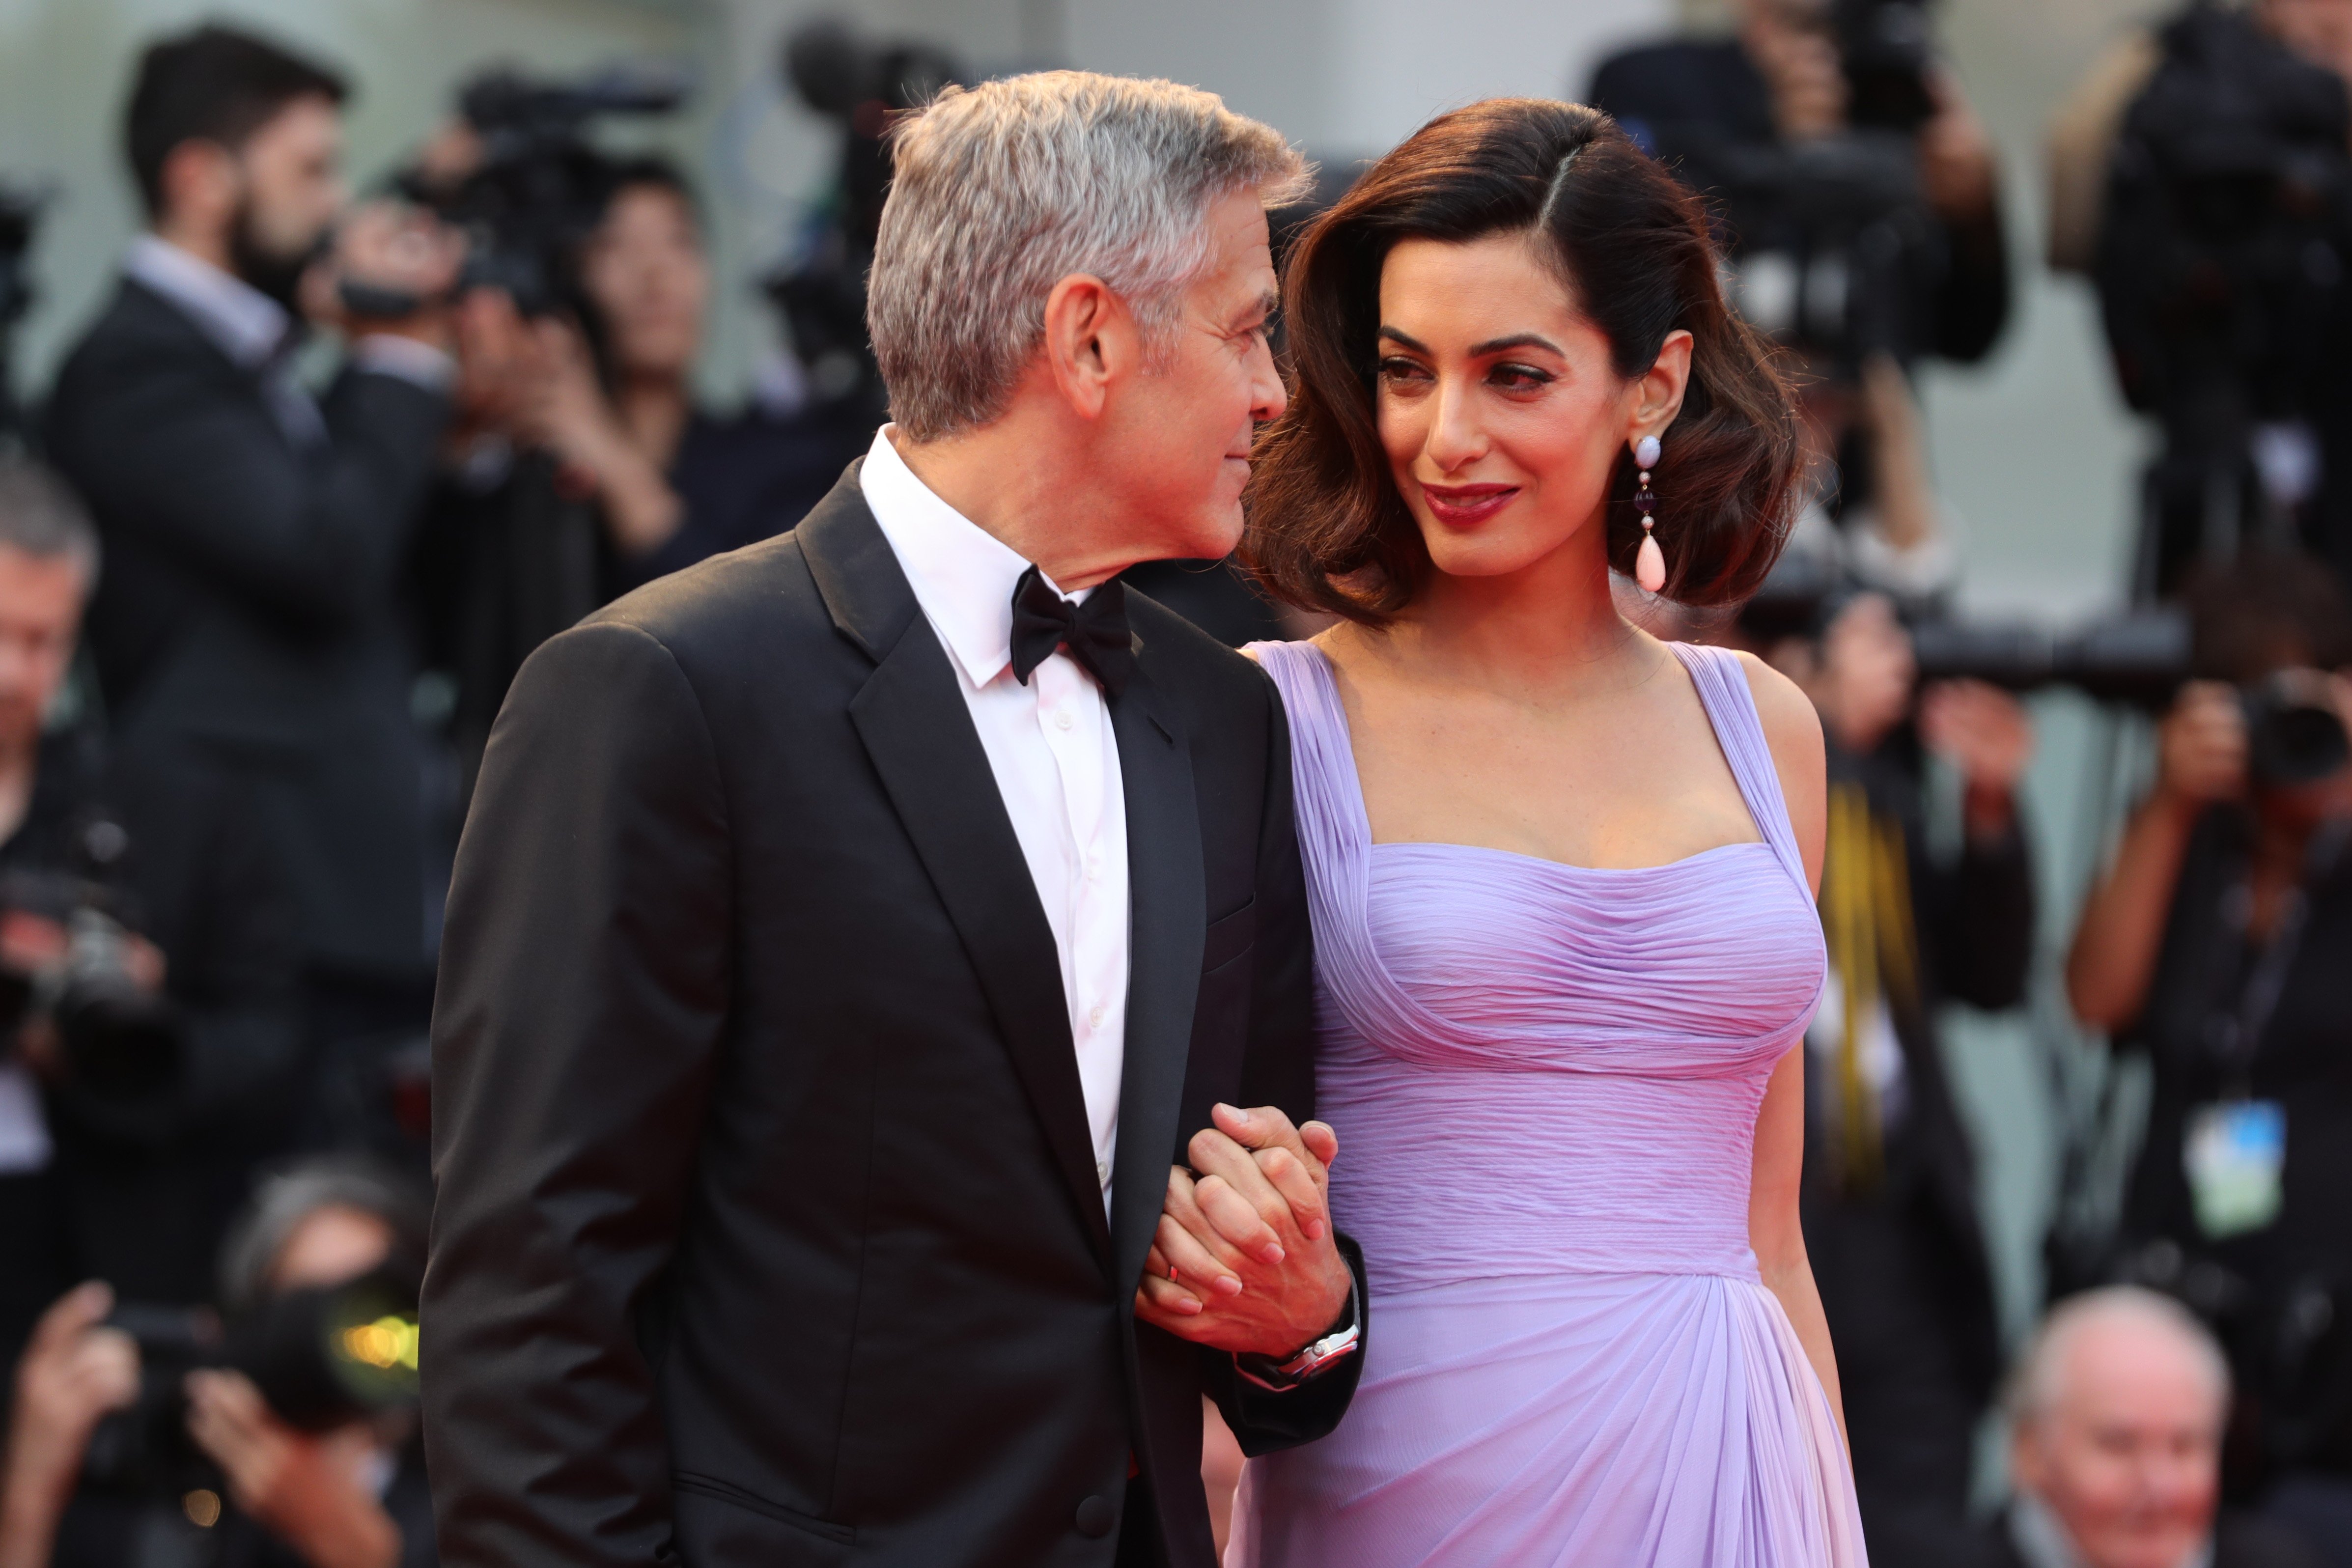 George Clooney and Amal Clooney at the 'Suburbicon' screening during the 74th Venice Film Festival at Sala Grande on September 2, 2017 in Venice, Italy | Source: Getty Images